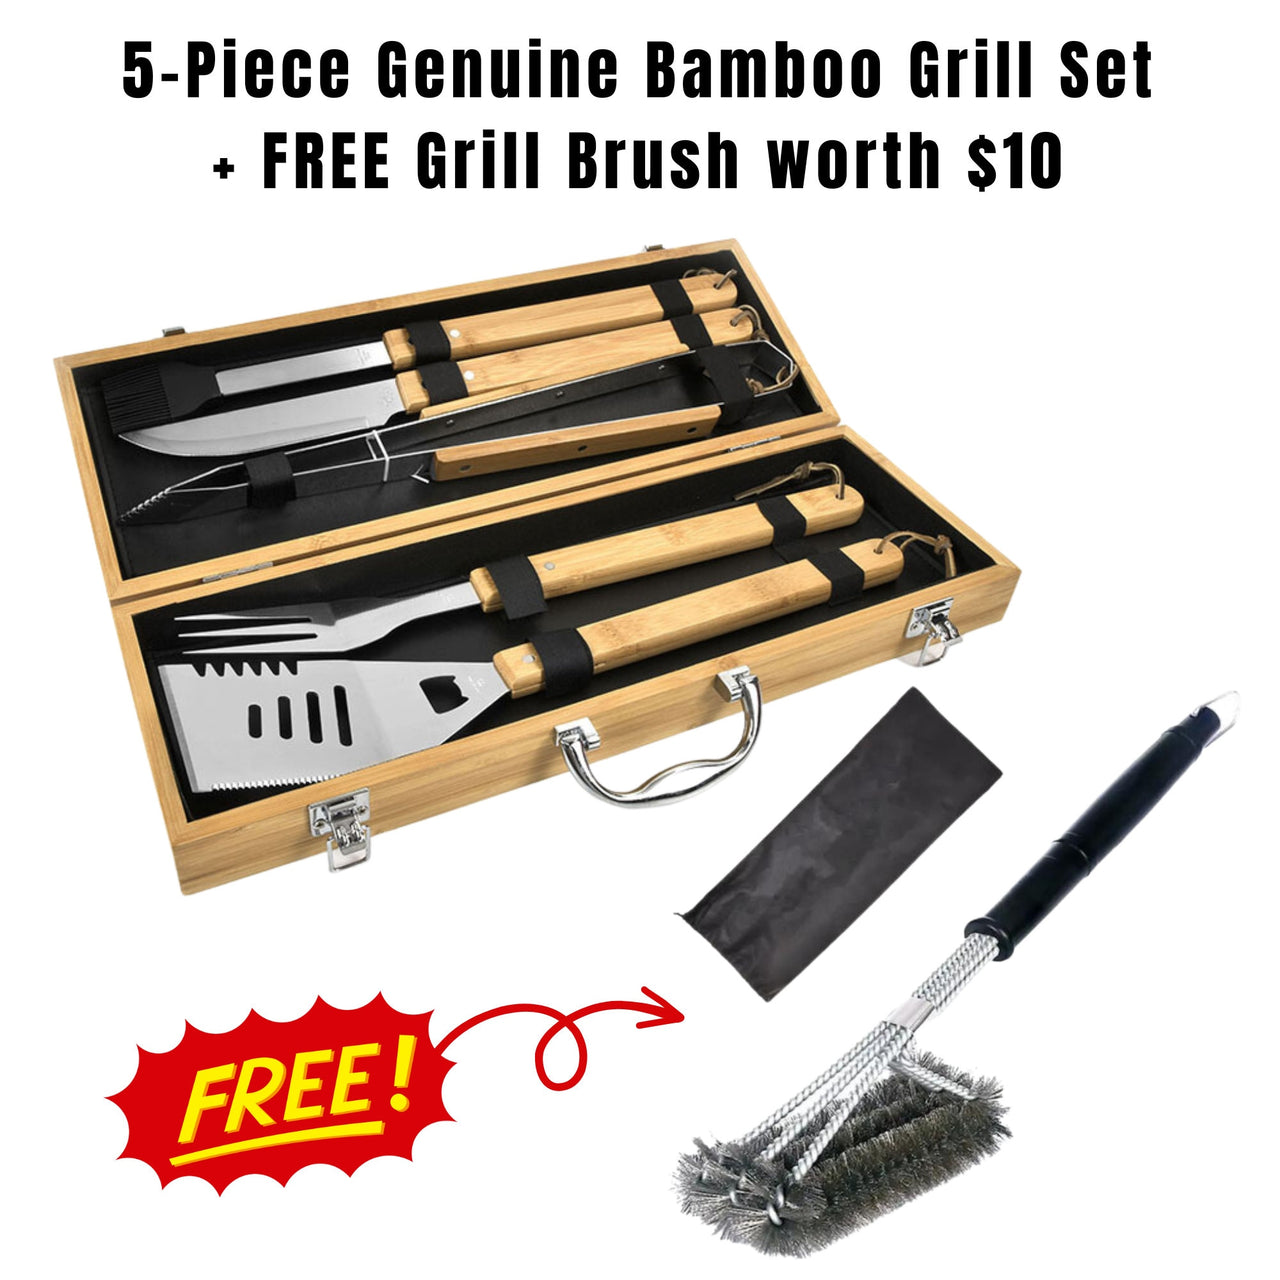 The Grill Master BBQ Set - Custom 5-Piece Grilling Gift for Father's Day